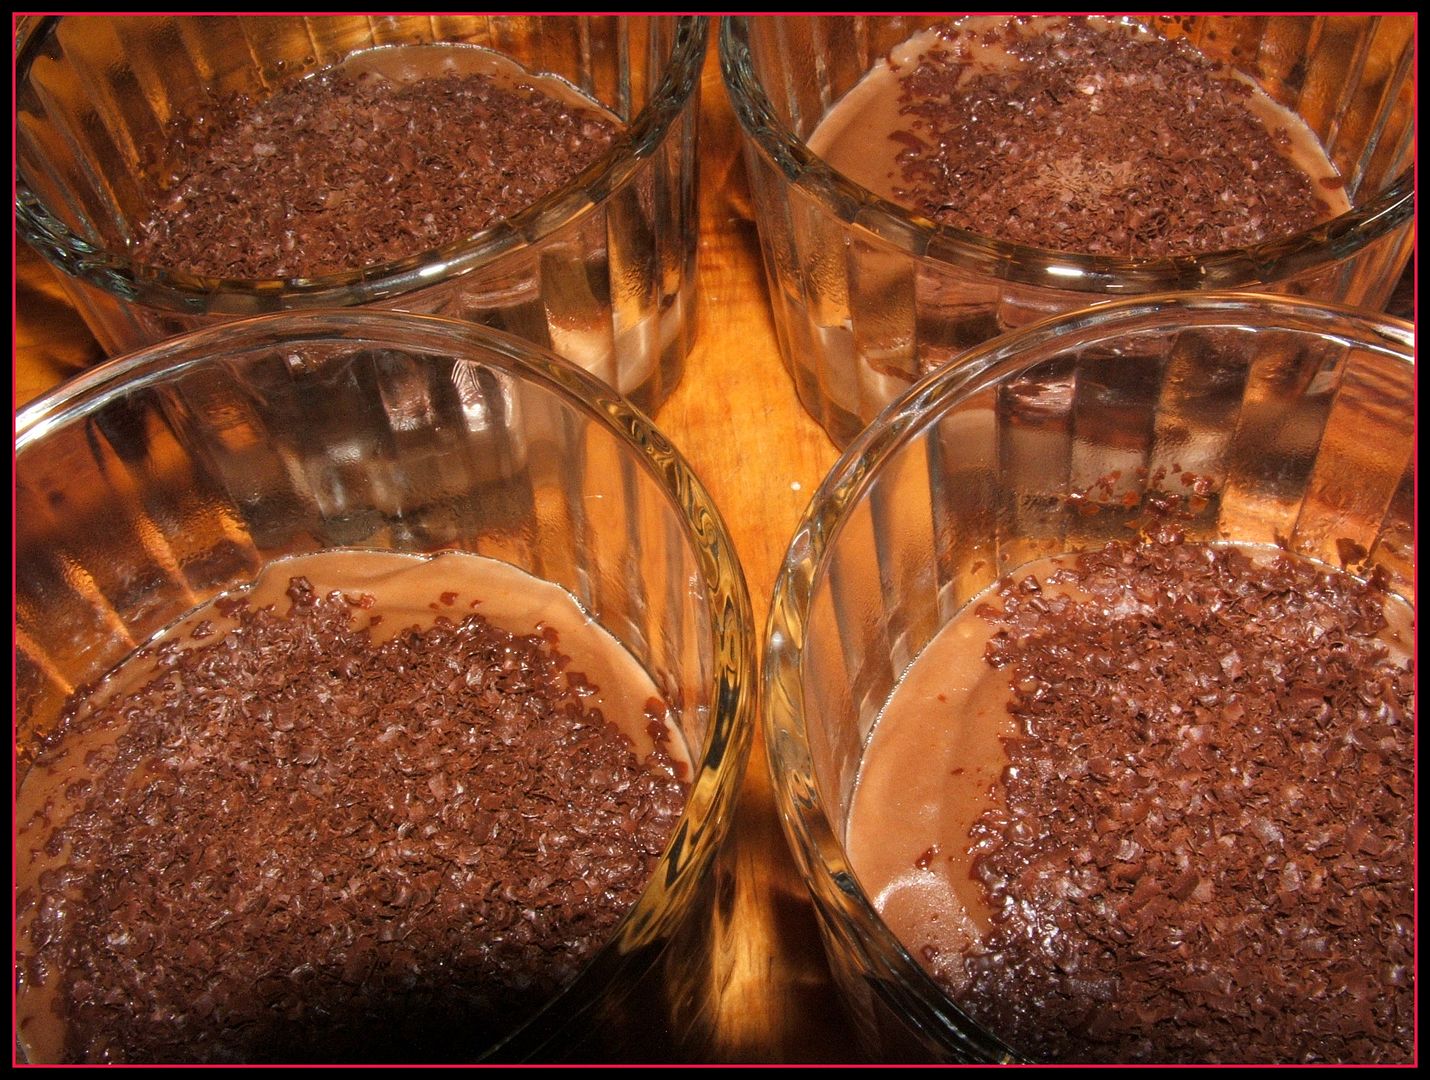 Chili Pepper Chocolate Creme Brulee by Angie Ouellette-Tower photo 002_zpsa971d73a.jpg